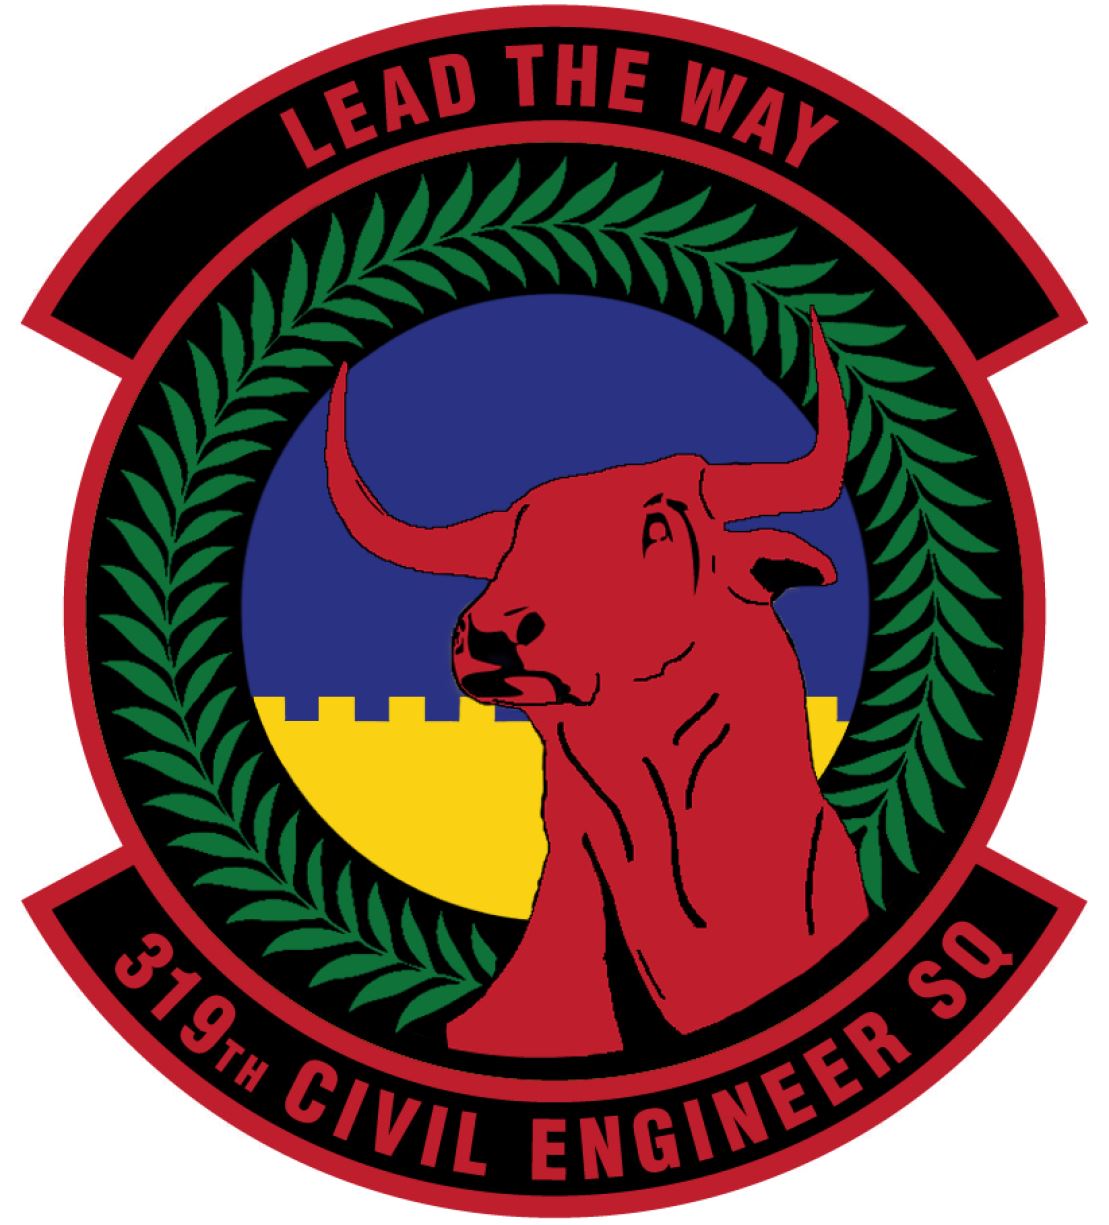 This is an image of the 319th Civil Engineer Squadron seal.